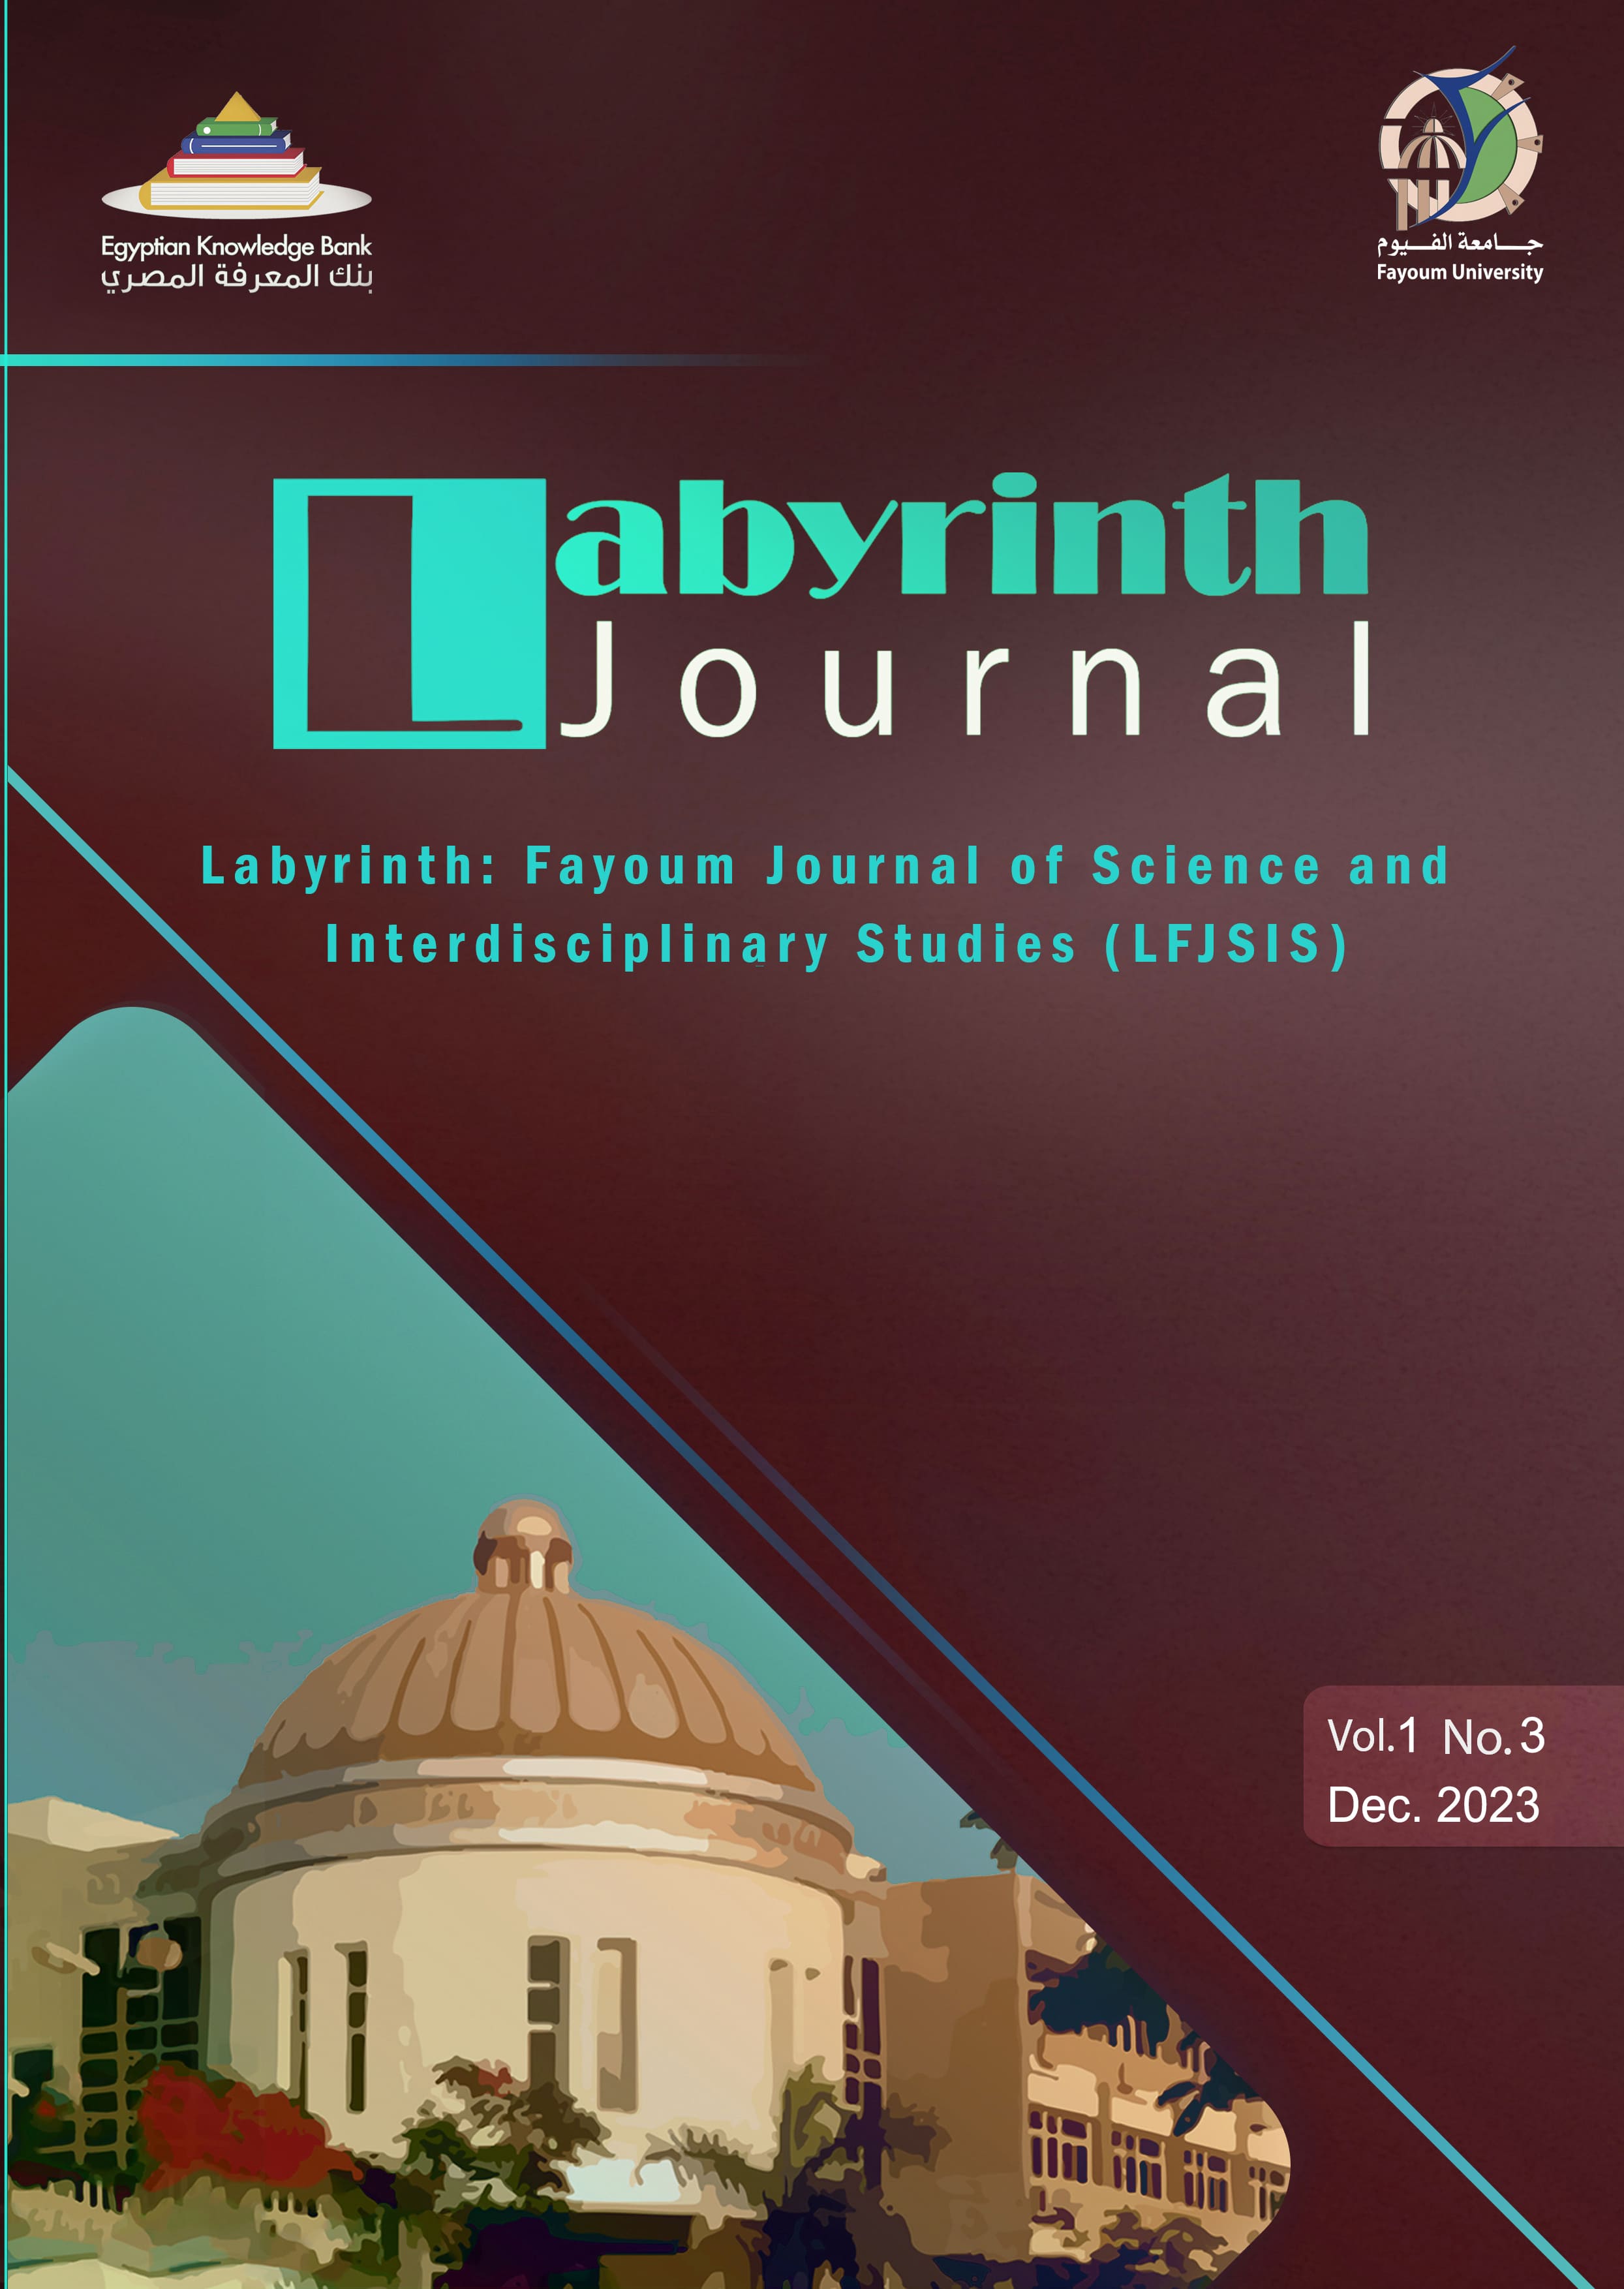 Labyrinth: Fayoum Journal of Science and Interdisciplinary Studies